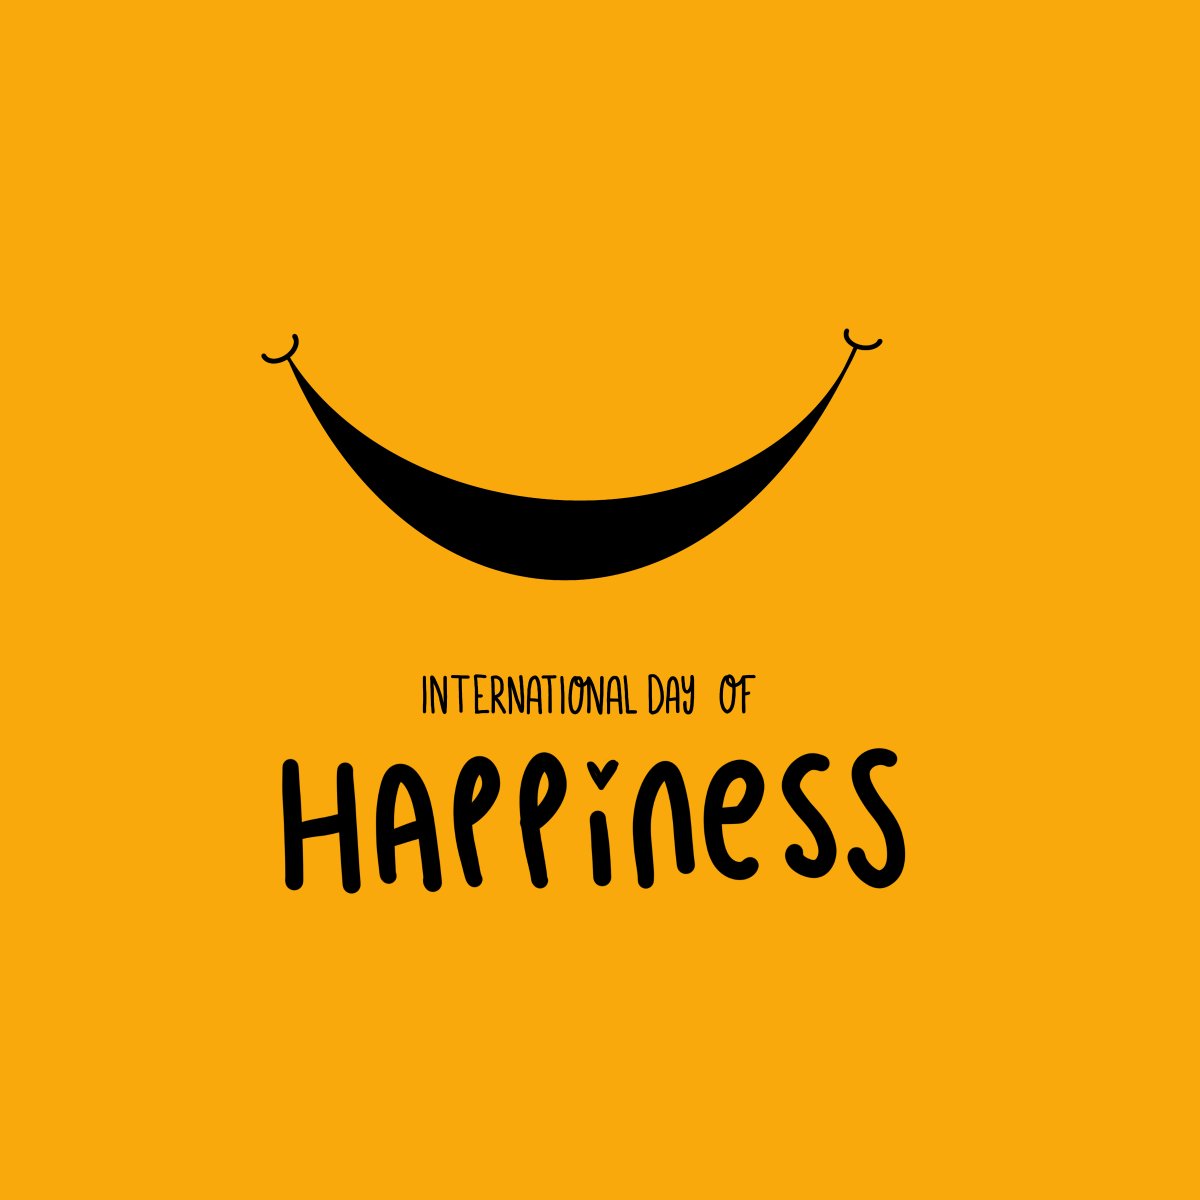 Happy International Day of Happiness 💛 our mission of the day is to make everyone smile 😃 #internationaldayofhappiness #spreadhappiness #happiness #goodvibes #showyoucare #sendacard #sendacarddeliverasmile